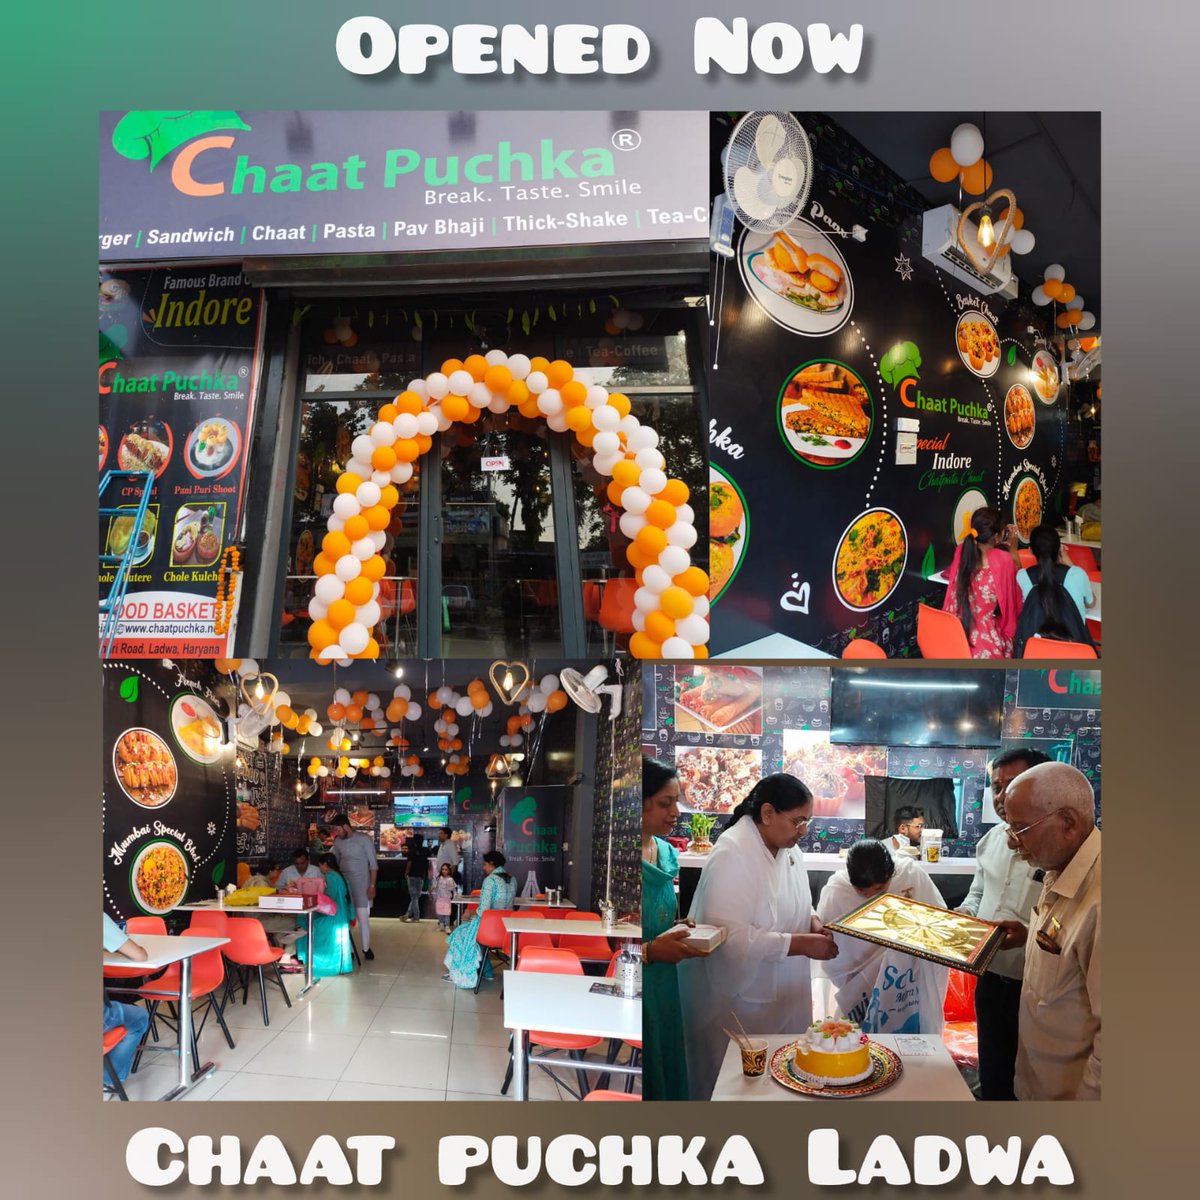 Our Chaat Puchka Opened Now in Ladwa, Haryana..
Chaat Puchka has the best fast food and street food.
.
.
#chaatpuchka #visitchaatpuchka #chaat #foodie #foodlover #delicious #grandopening #opennow #Ladwa #haryana #HaryanaNews #haryanafoodie #cafeopening #ladwacity #Haryanafood